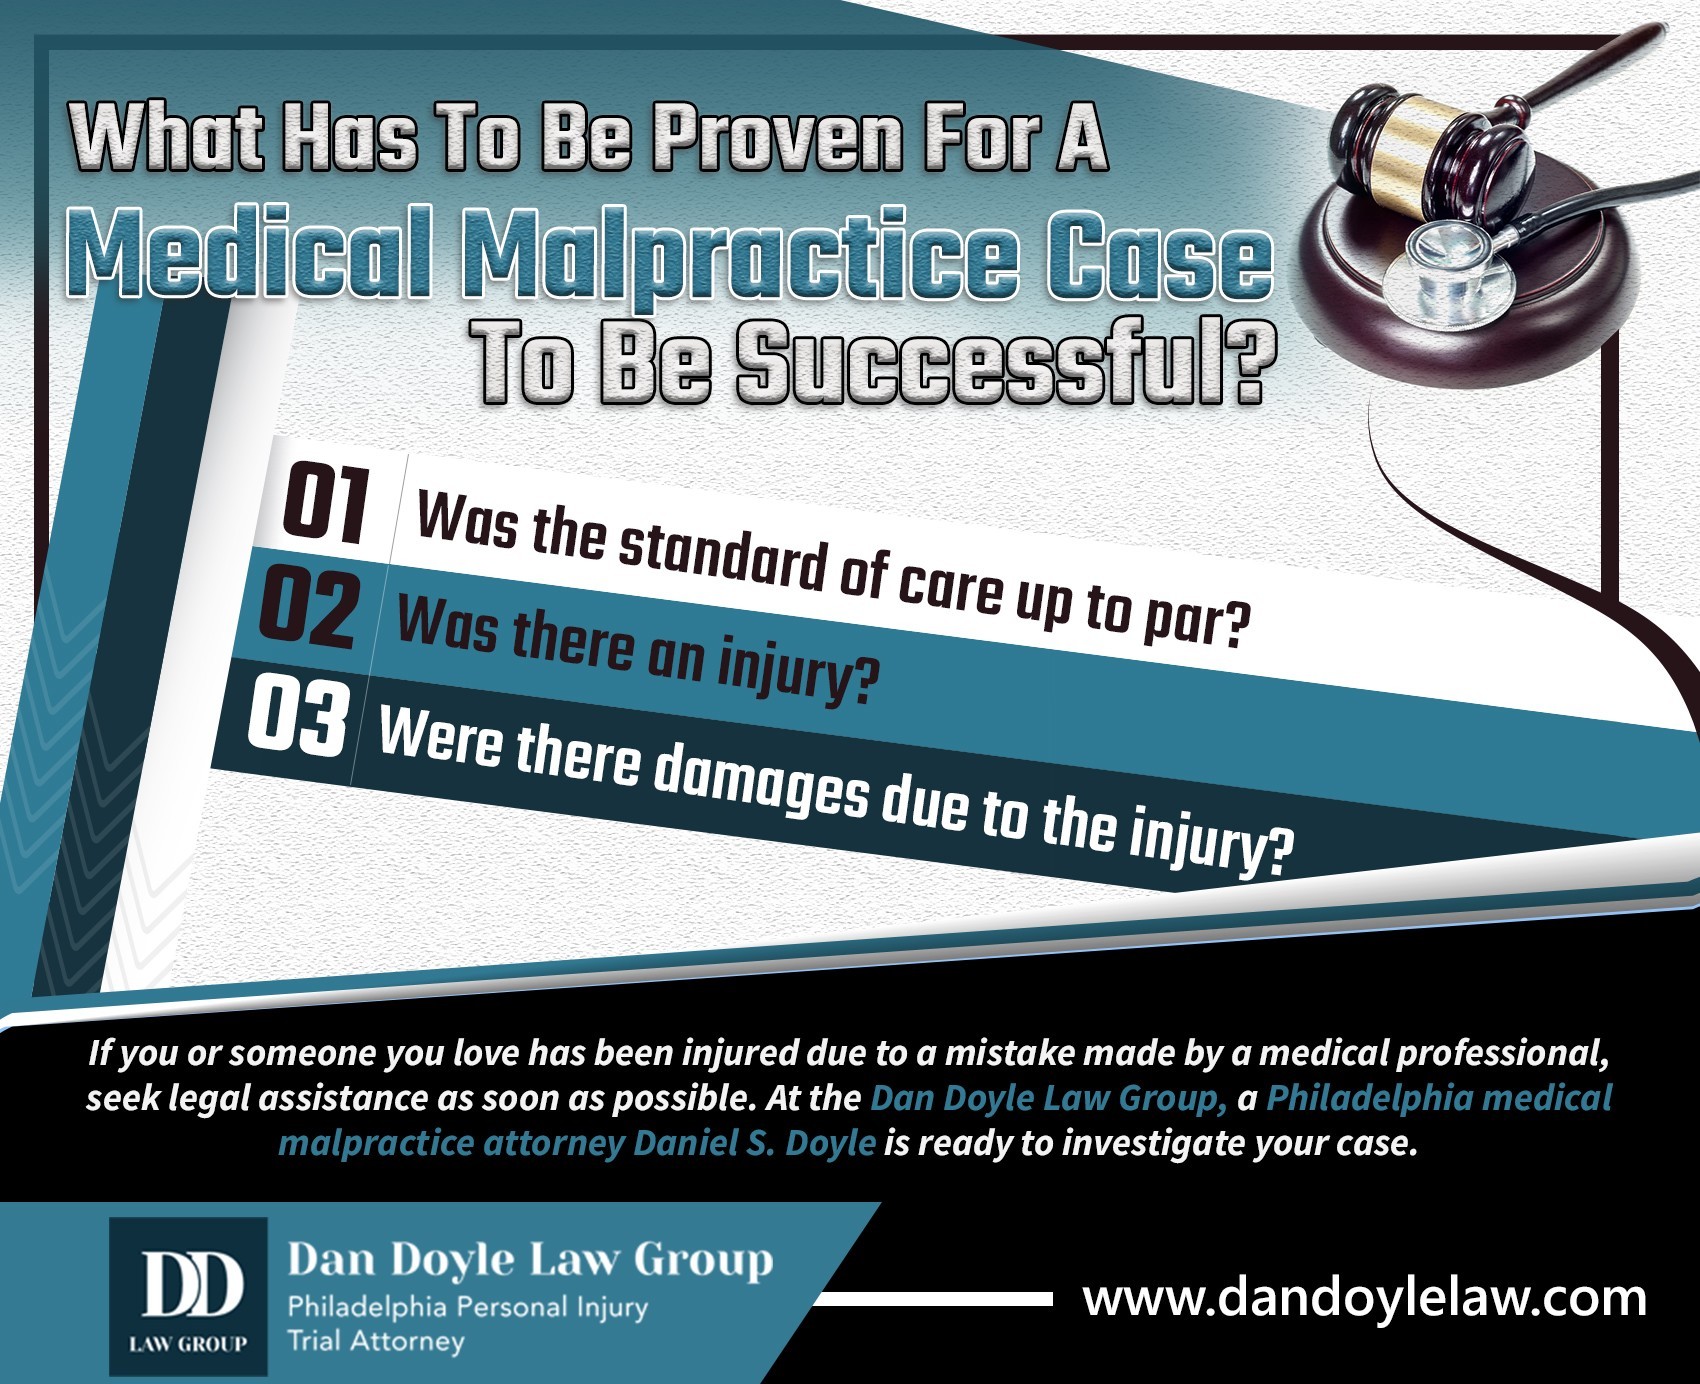 What Has To Be Proven For A Medical Malpractice Case To Be Successful?